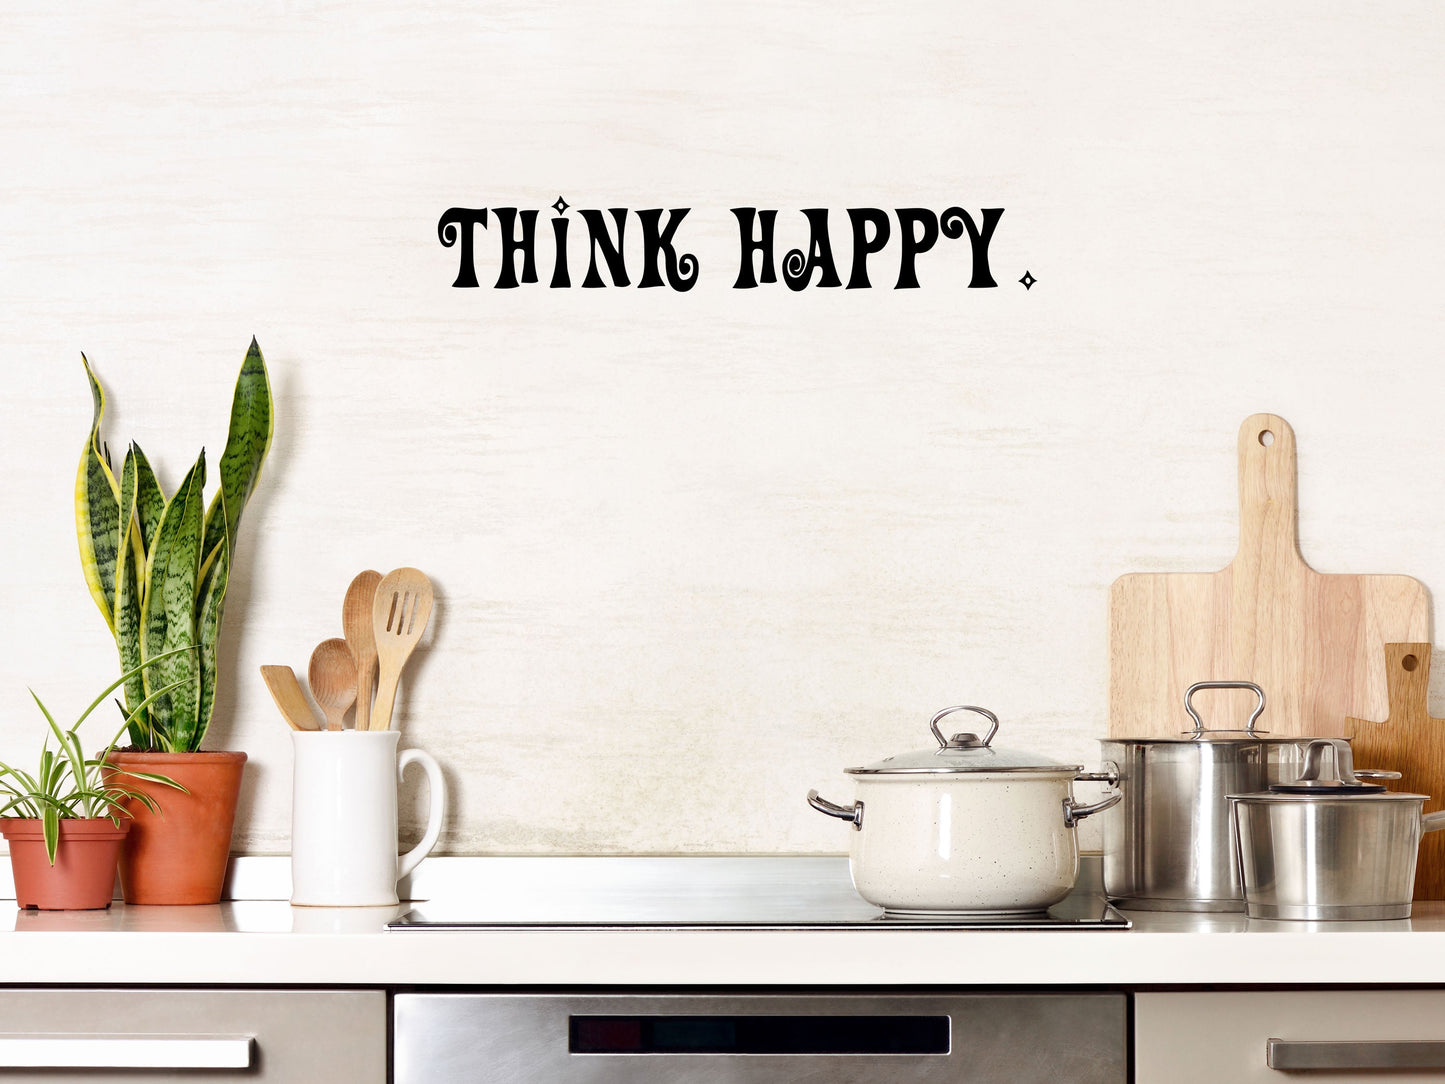 Think Happy Vinyl Wall Decal,Think Happy Wall Art, Vinyl, Inspirational Quote, Think Happy Sign, Think Happy Quote, Happy Vinyl Wall Decal Inspirational Wall Signs 